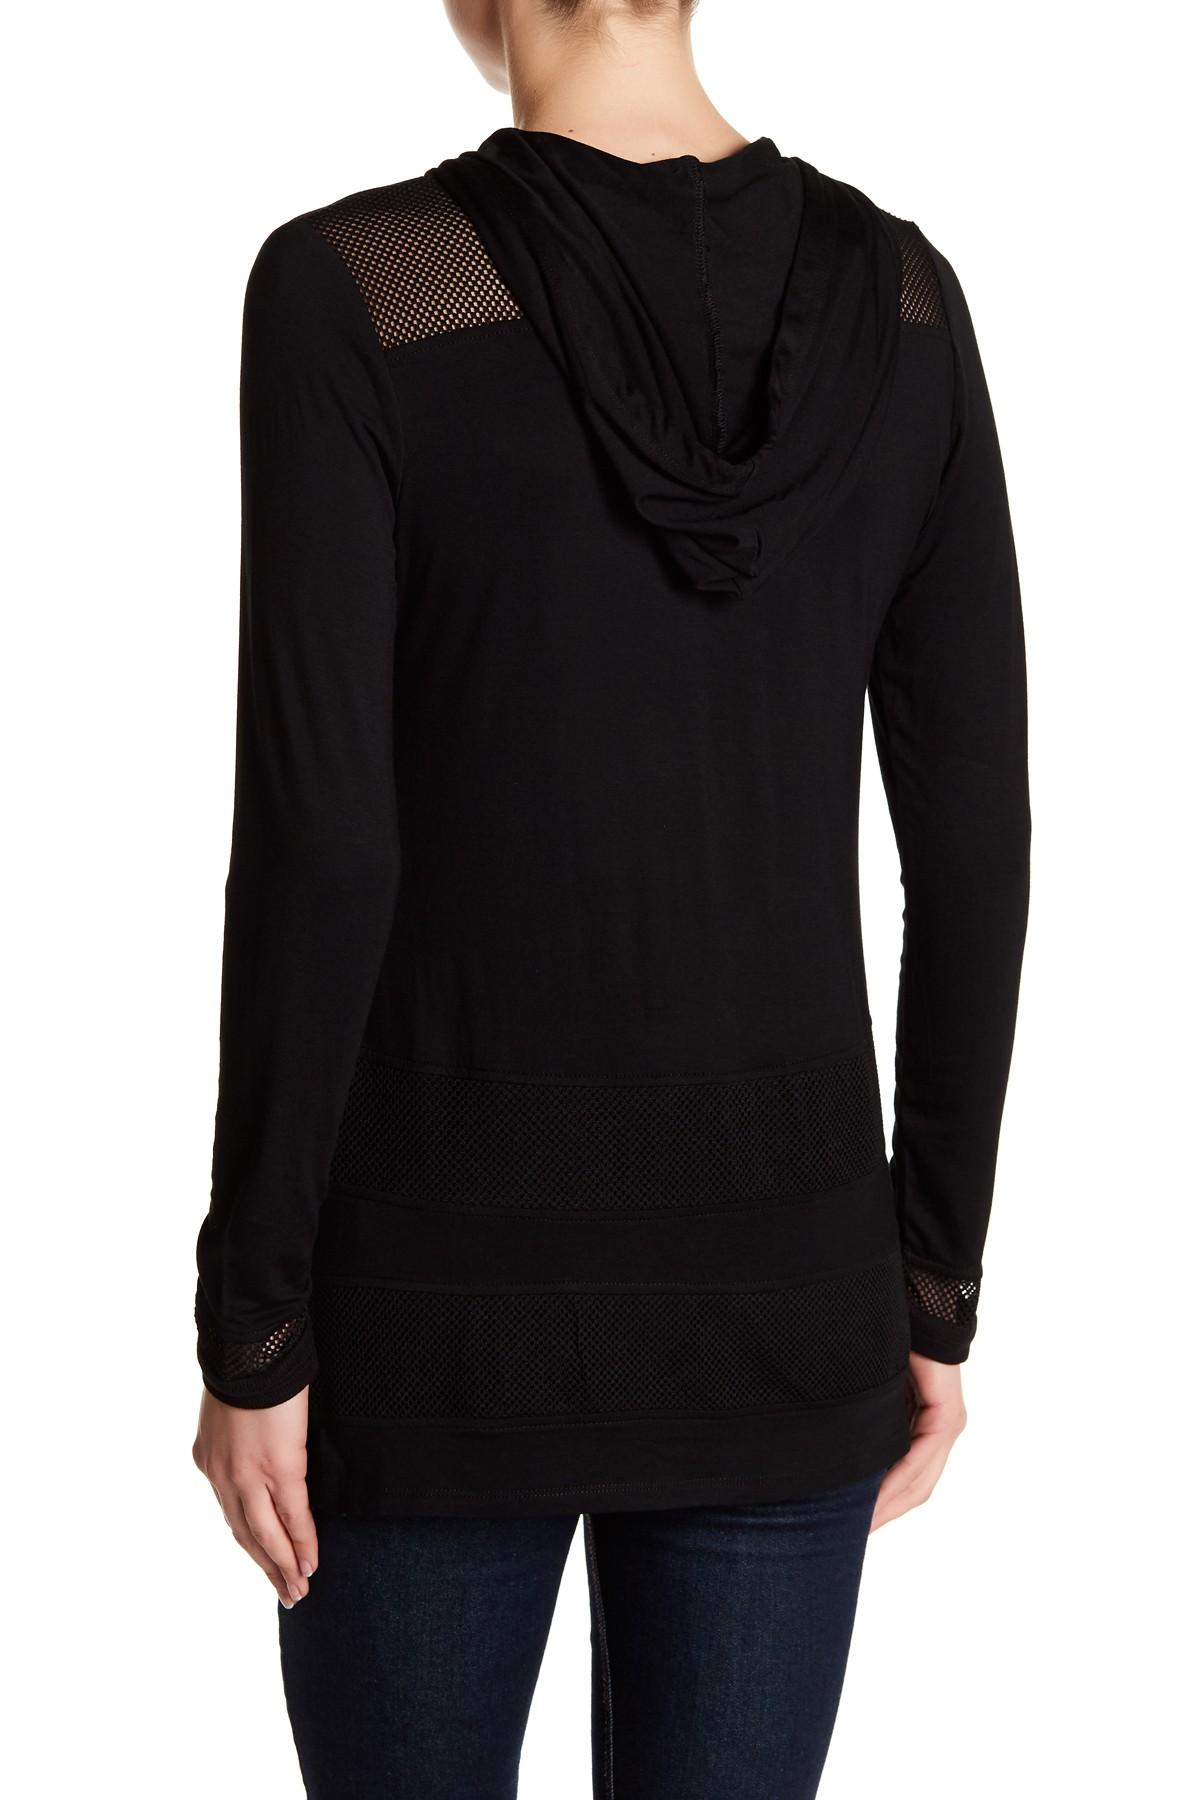 Cable & Gauge Synthetic Long Sleeve Pullover Hoodie in Black | Lyst